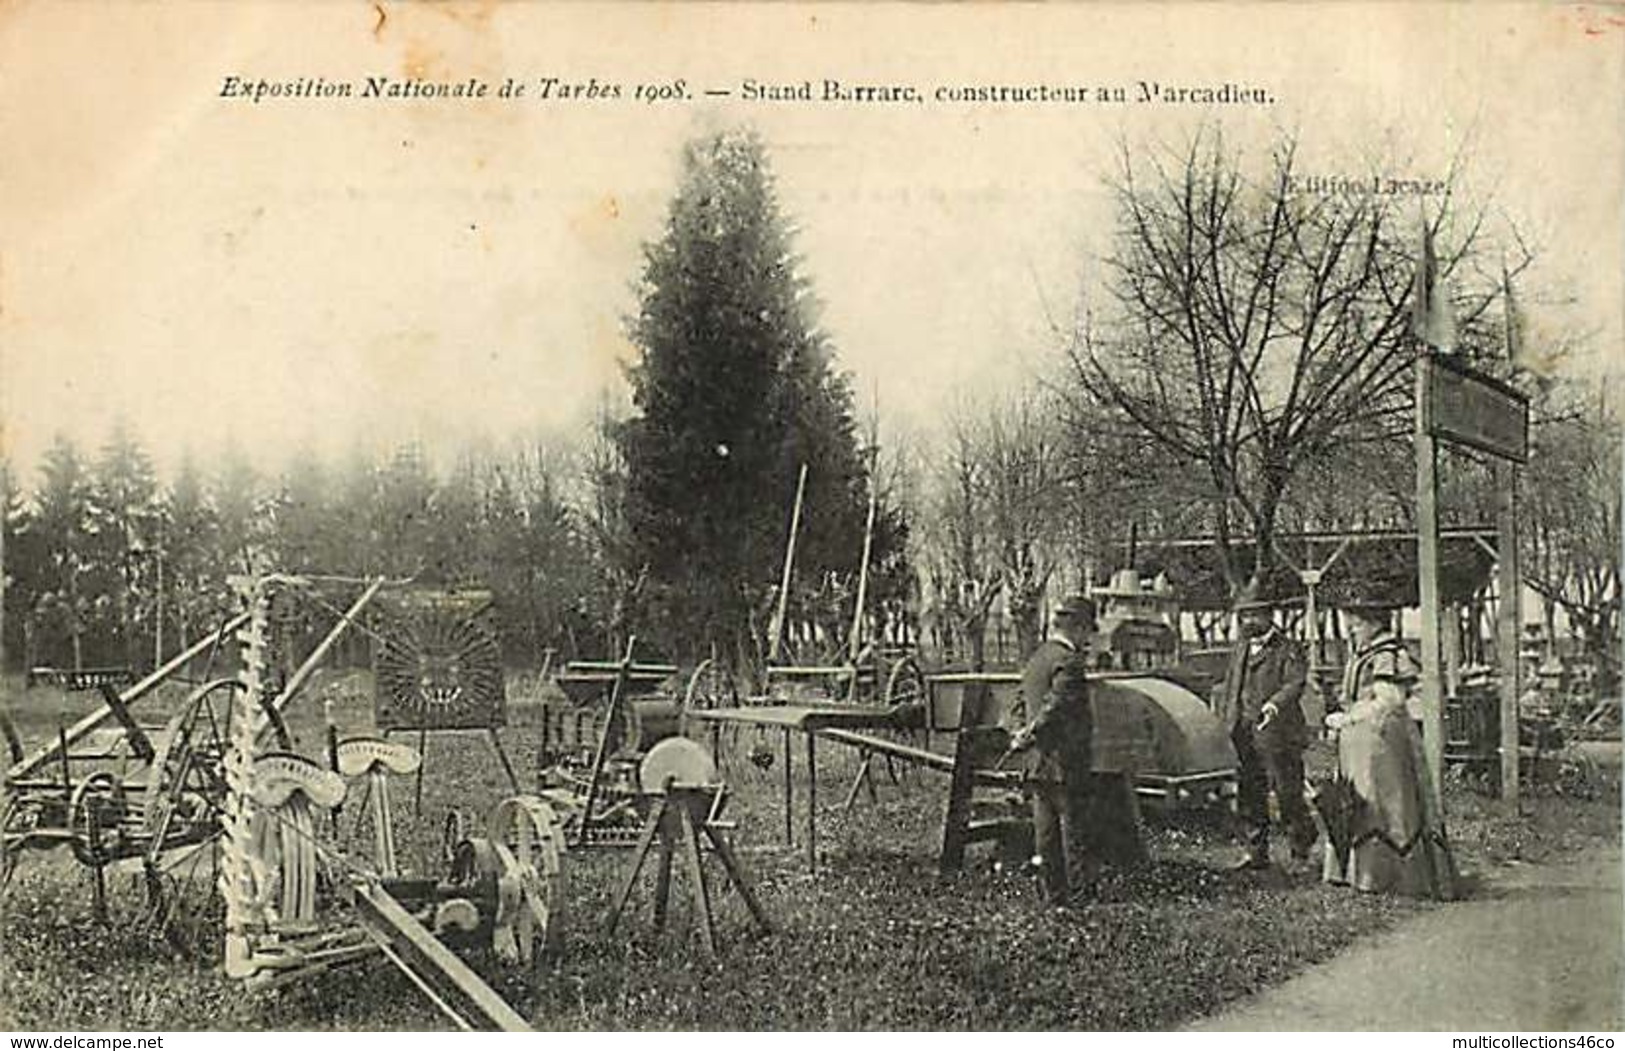 080320A - 65 TARBES Exposition Nationale 1908 Stand Barrarc Constructeur Marcadieu - Machine Agricole Agriculture - Tarbes